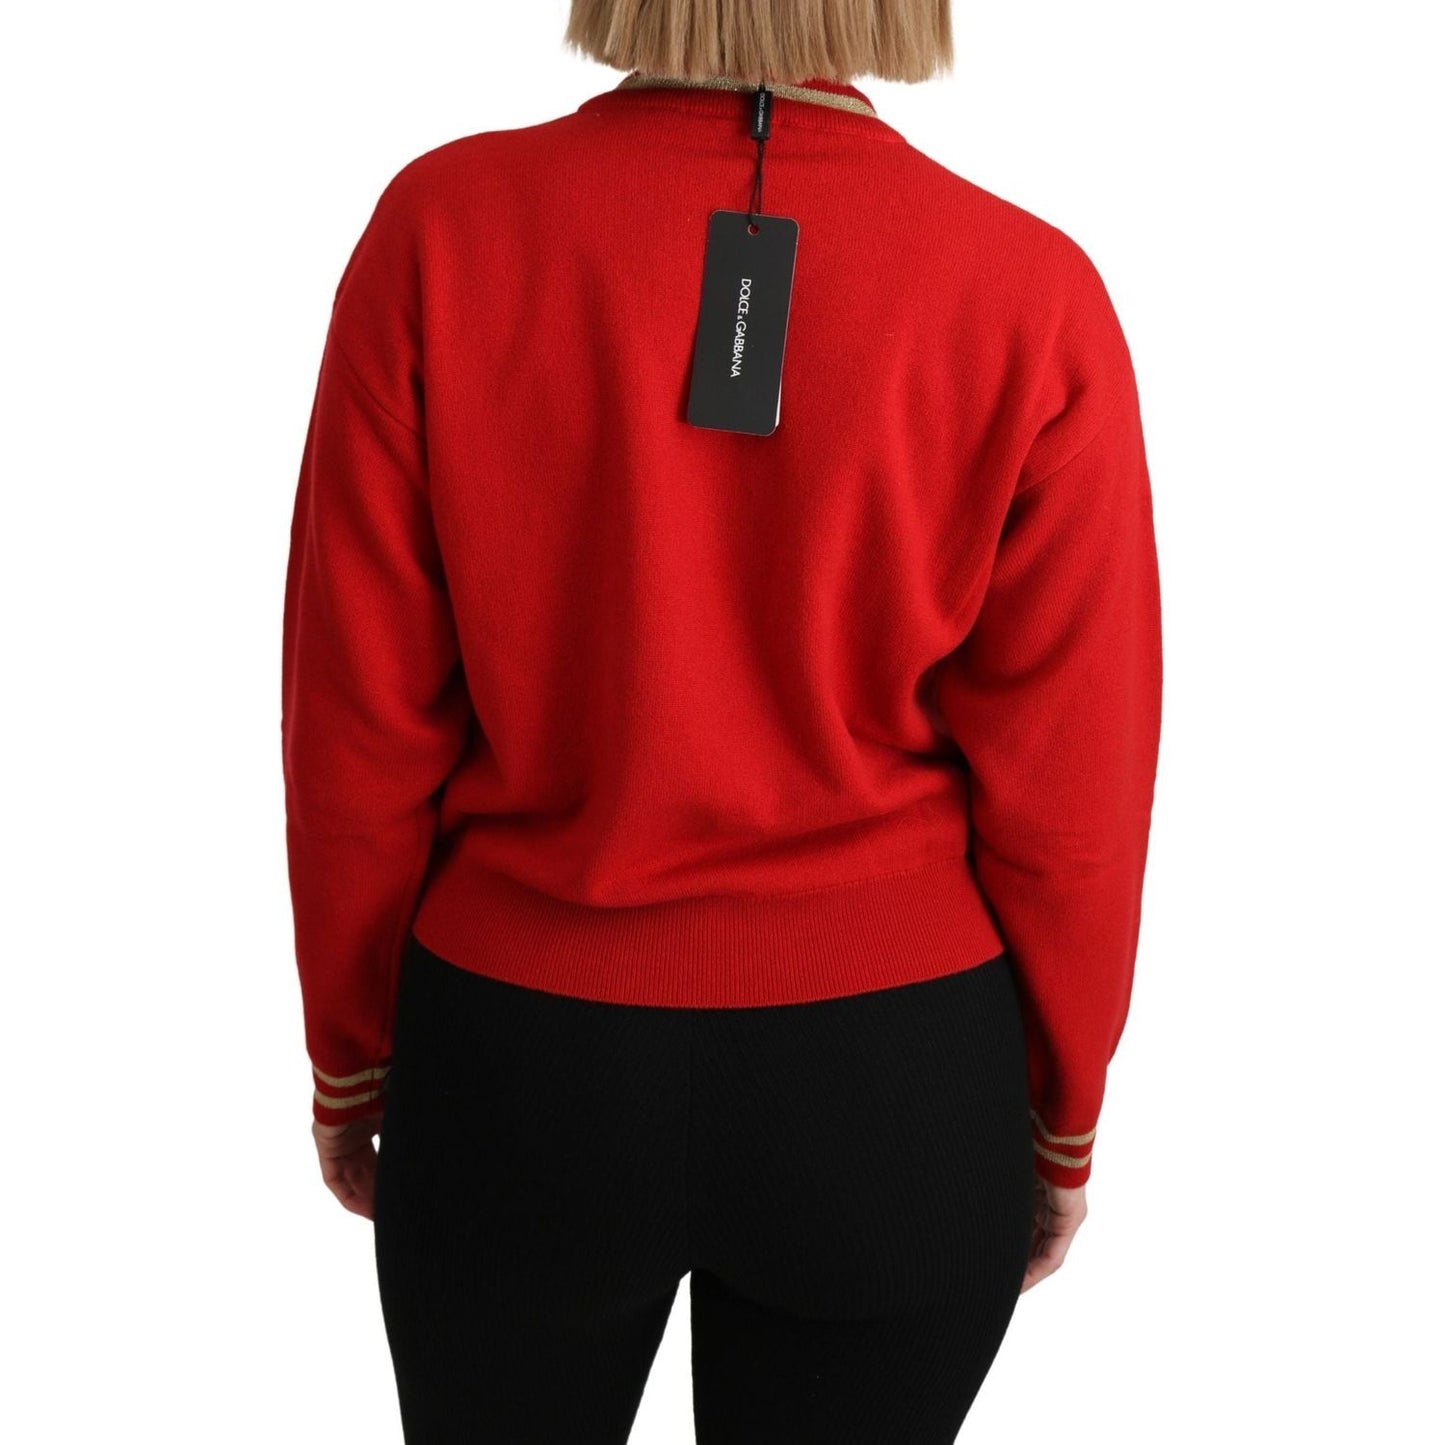 Dolce & Gabbana Radiant Red Cartoon Motive Cashmere Sweater red-knitted-cashmere-cartoon-top-sweater